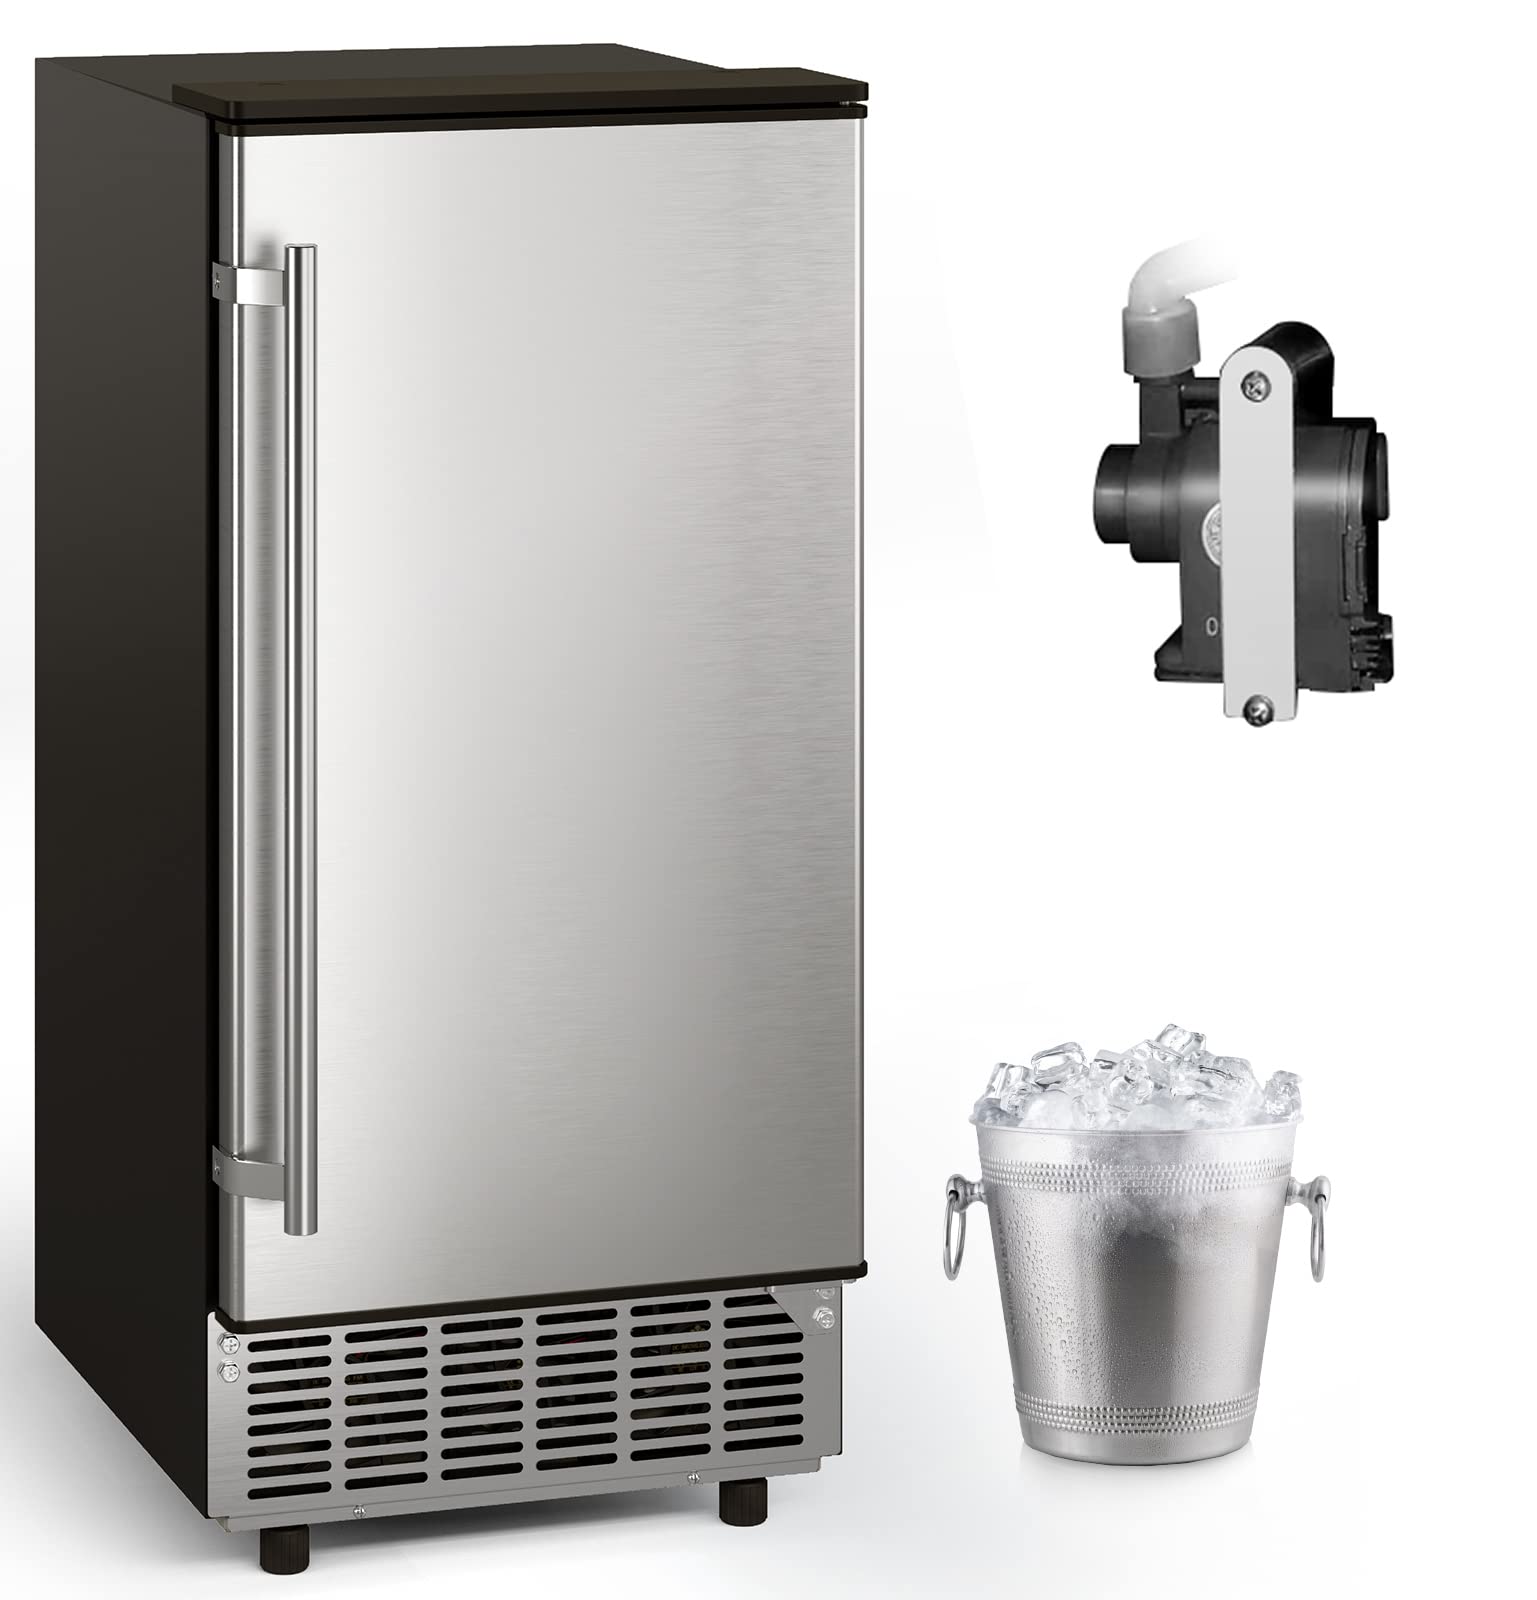 GLACER Under Counter Ice Maker